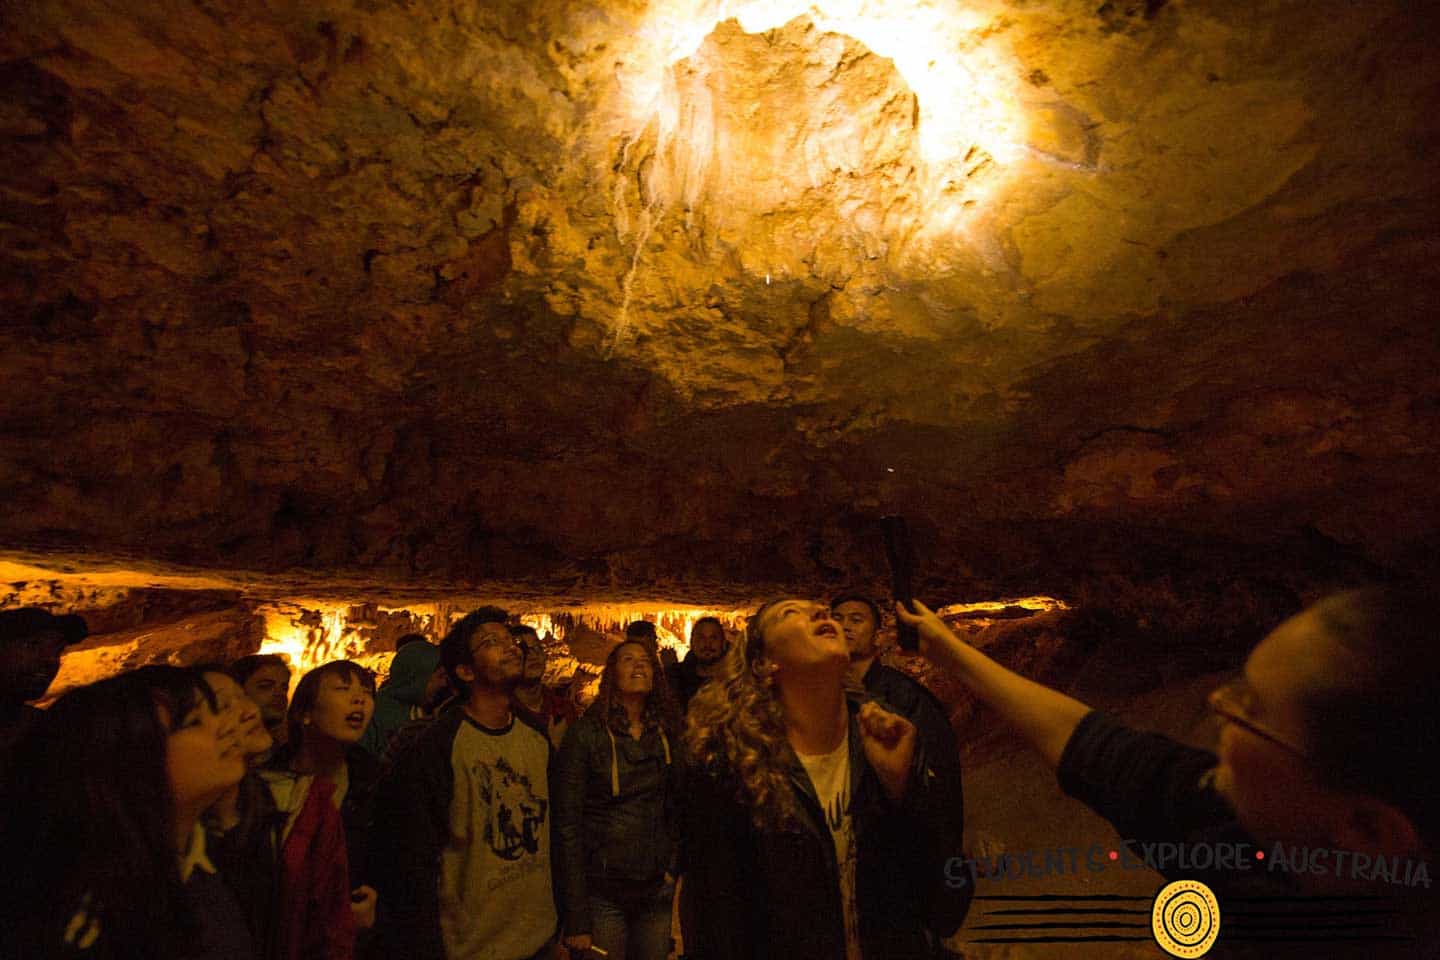 Students learning about a cave ceiling inside a cave